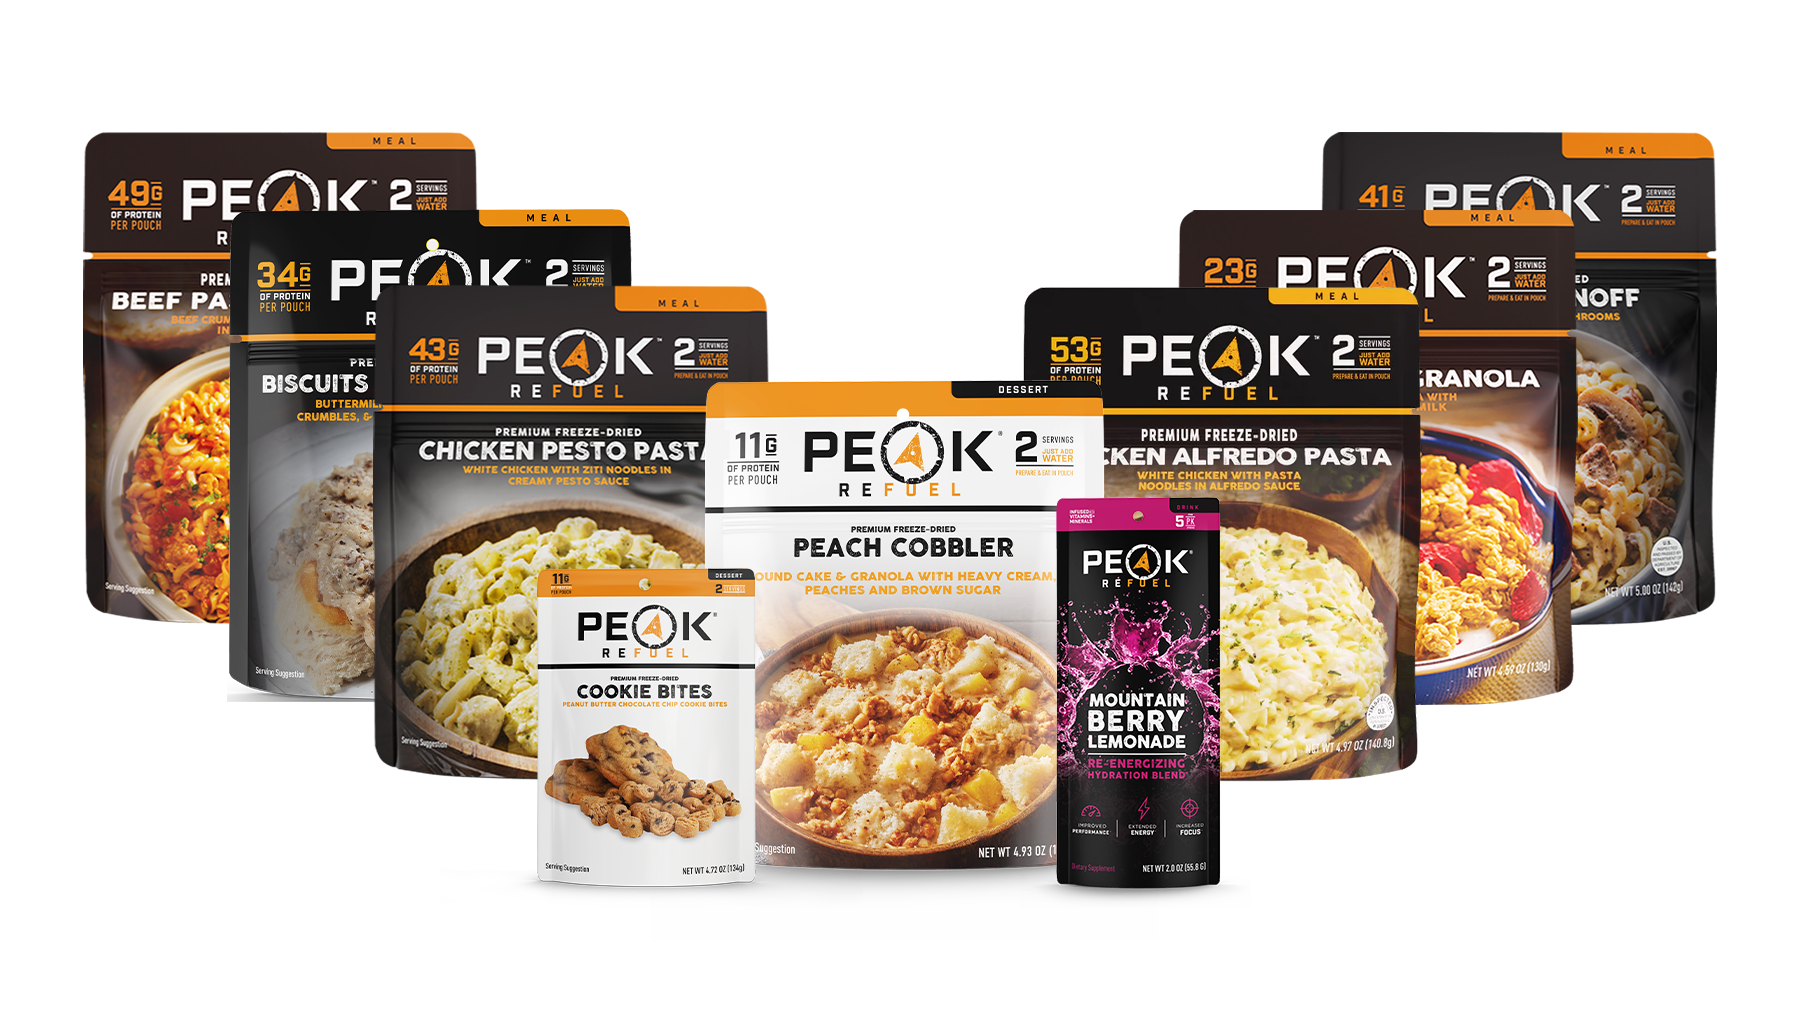 A group of Peak Refuel premium meals and drinks from the Elevation Variety Pack, including Strawberry Granola, Biscuits and Gravy, Beef Pasta Marinara, Beef Stroganoff, Chicken Alfredo, Chicken Pesto, Peach Cobbler, Cookie Bites, and Mountain Berry Lemonade 5-Pack.